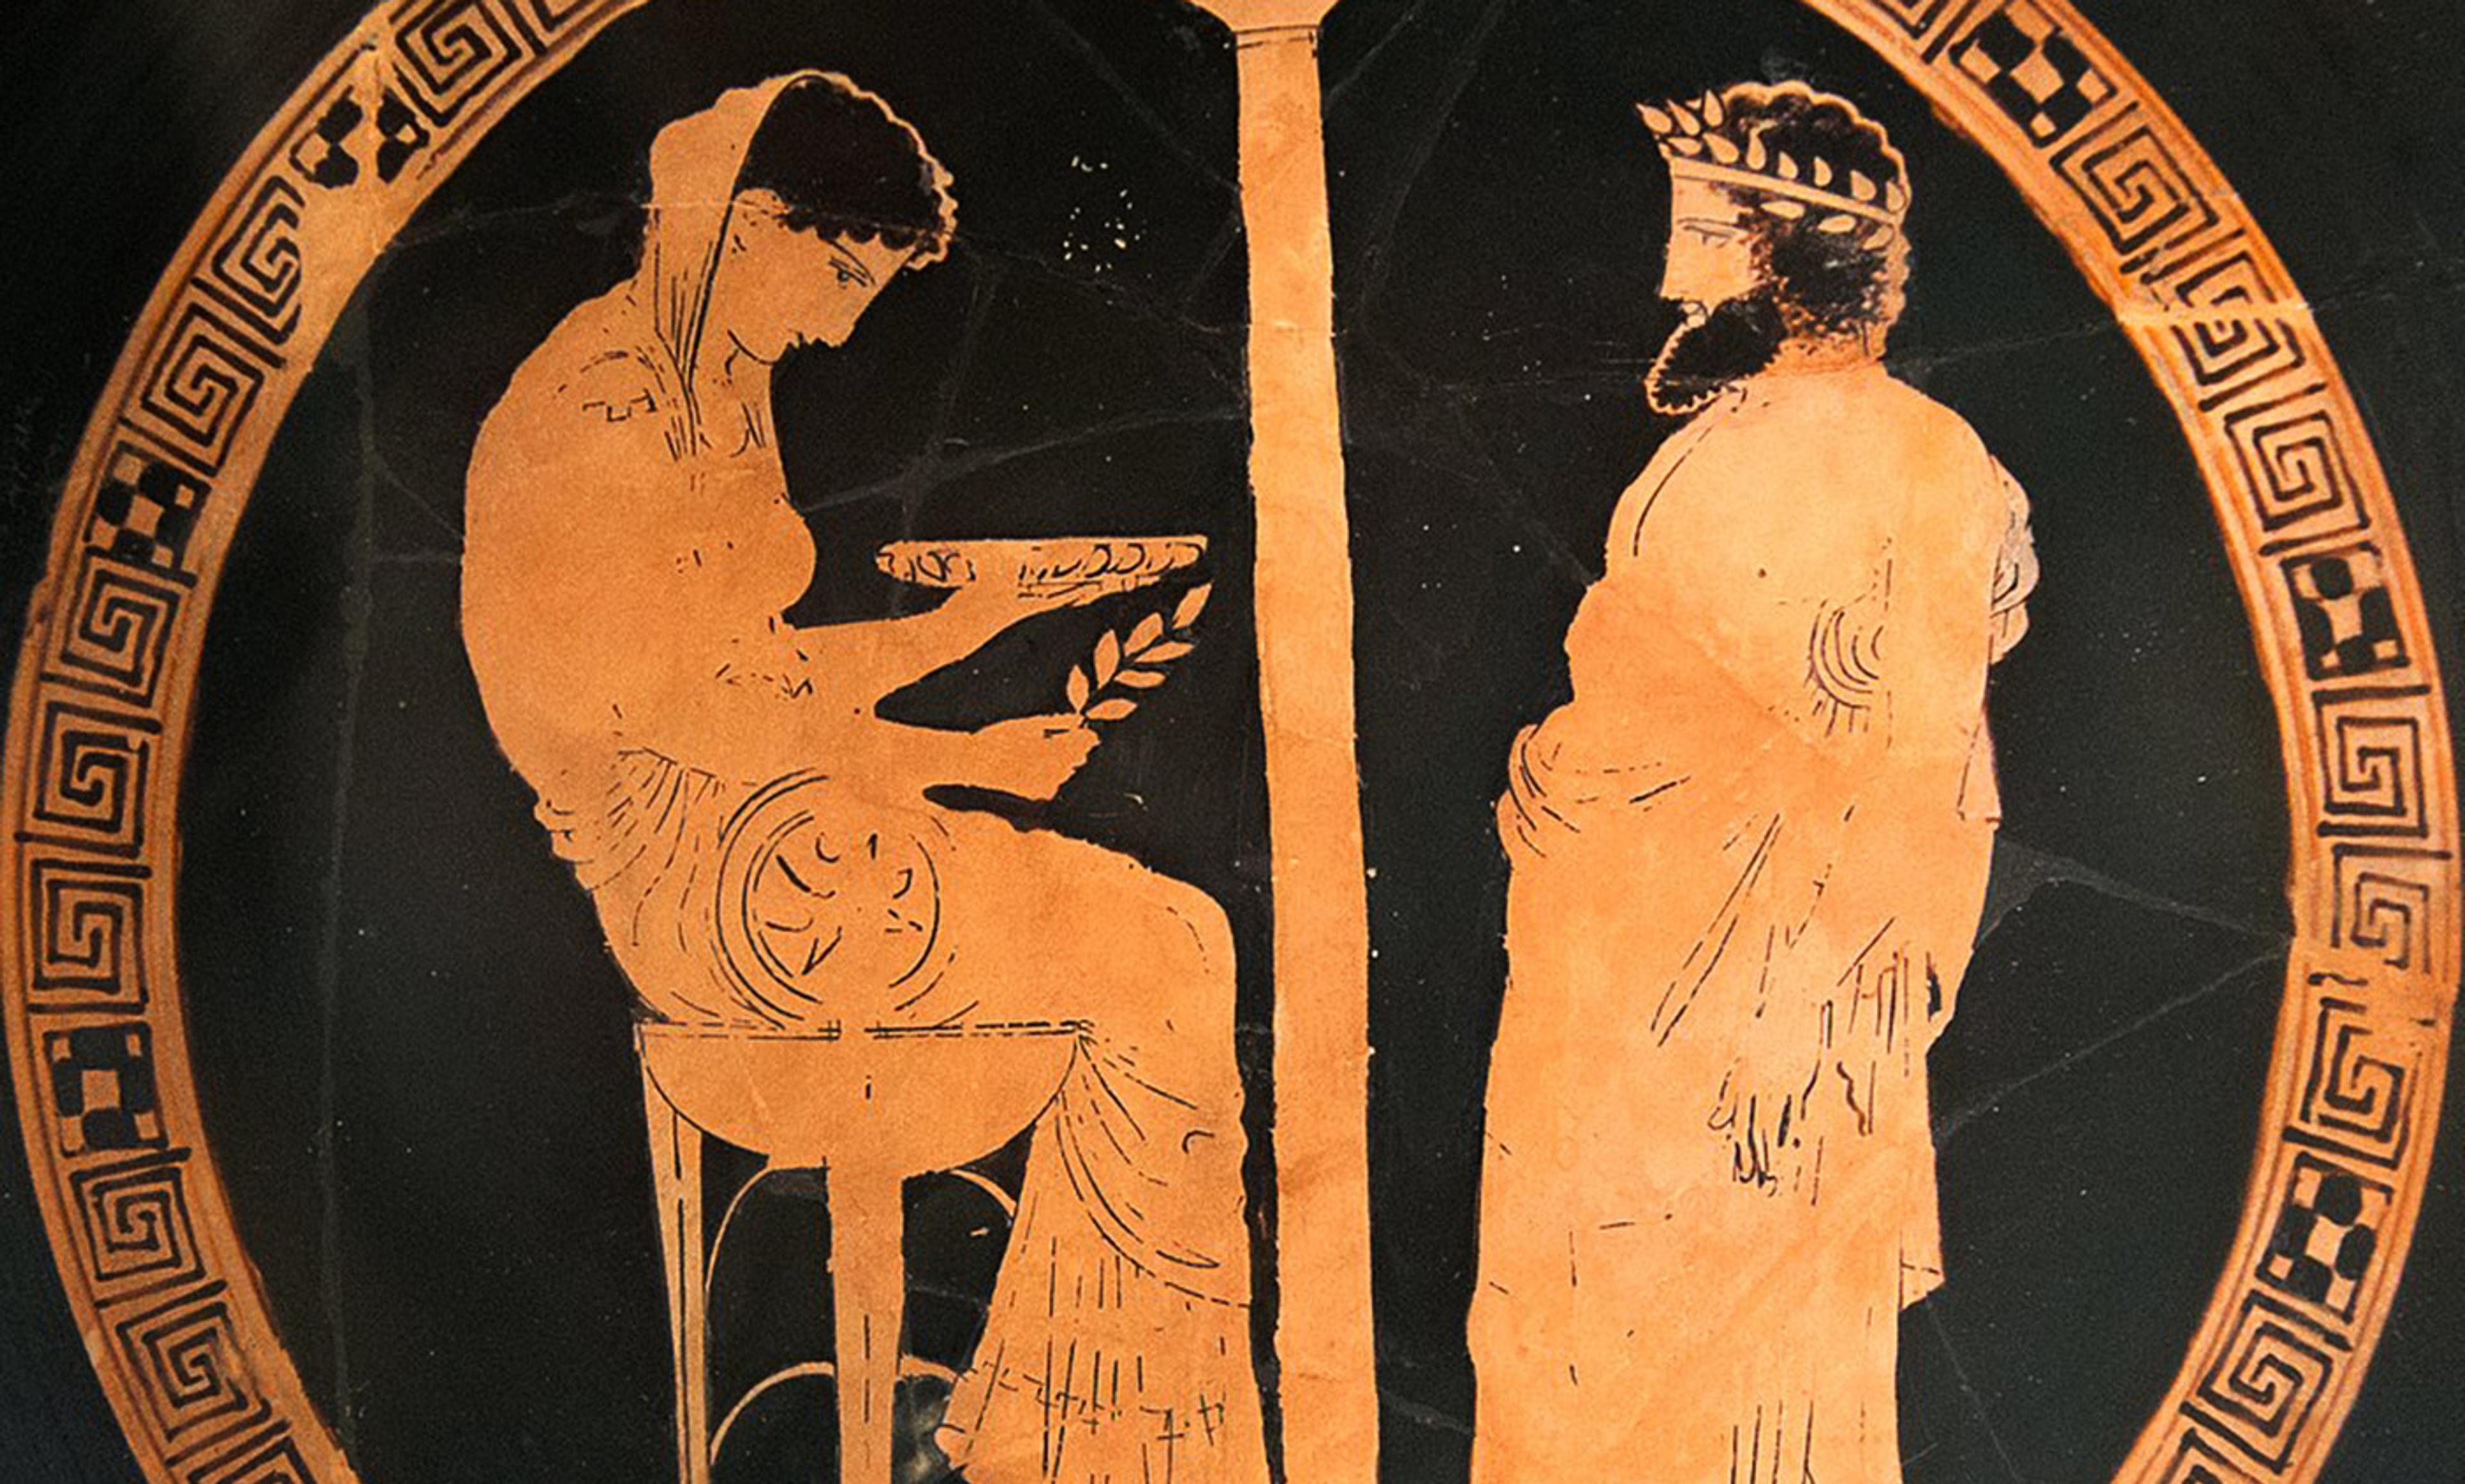 <p>An Attic red-figure kylix from Vulci (Italy), 440-430 BC, depicting King Aigeus in front of the Pythia at the Oracle of Delphi. Courtesy <a href="https://en.wikipedia.org/wiki/Aegeus#/media/File:Themis_Aigeus_Antikensammlung_Berlin_F2538_n2.jpg" target="_blank" rel="noreferrer noopener">Wikimedia.</a></p>